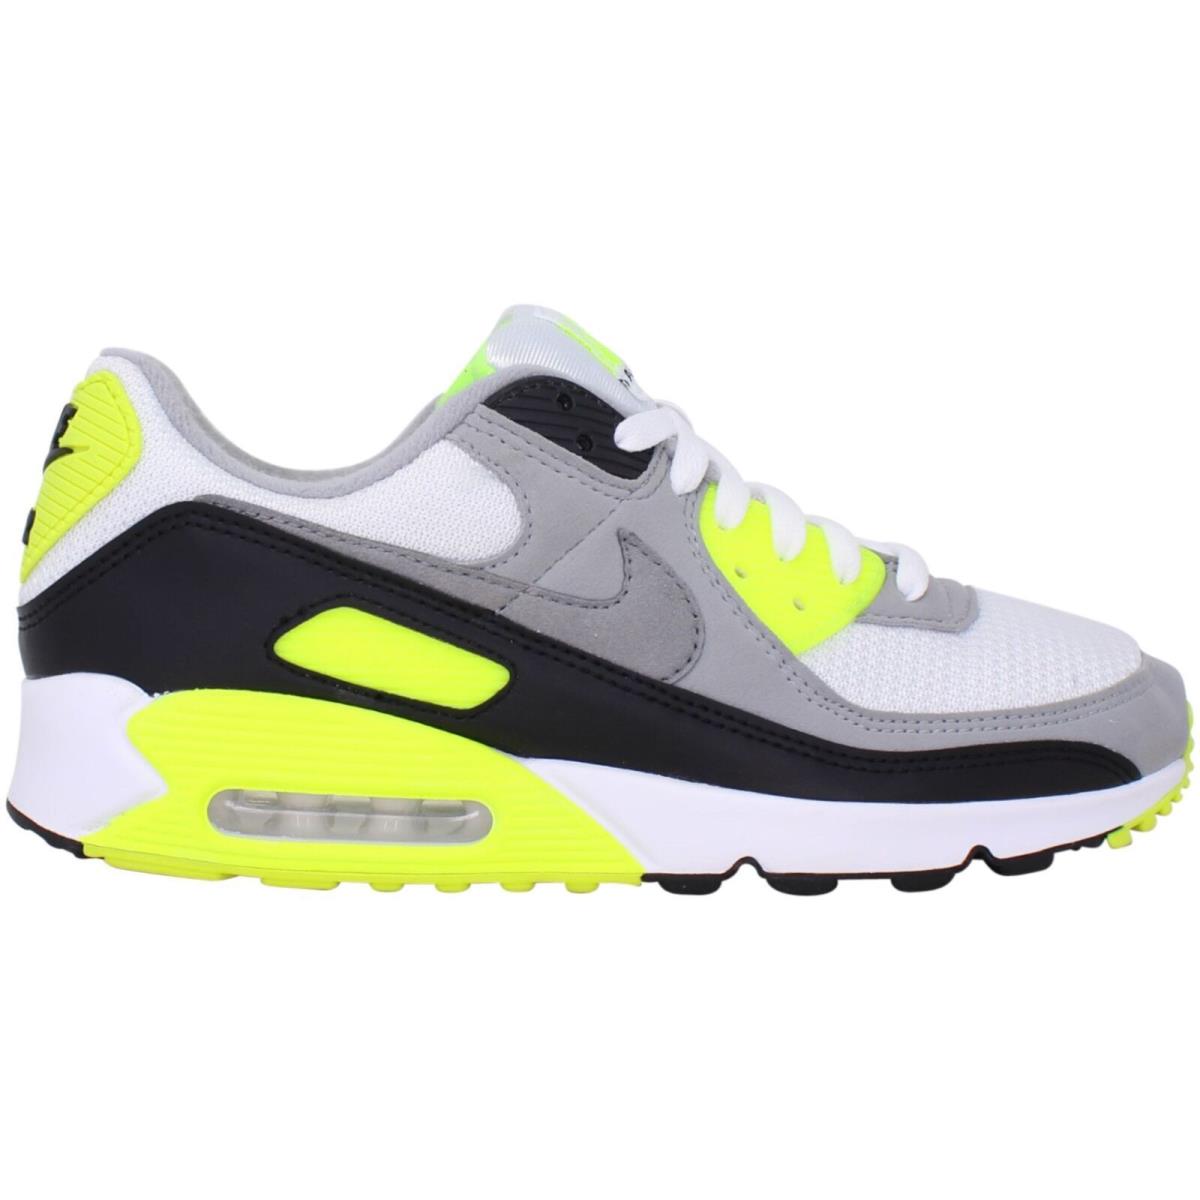 Nike Mens Air Max 90 Running Shoe Adult White Particle Grey Volt Black Lt Smok